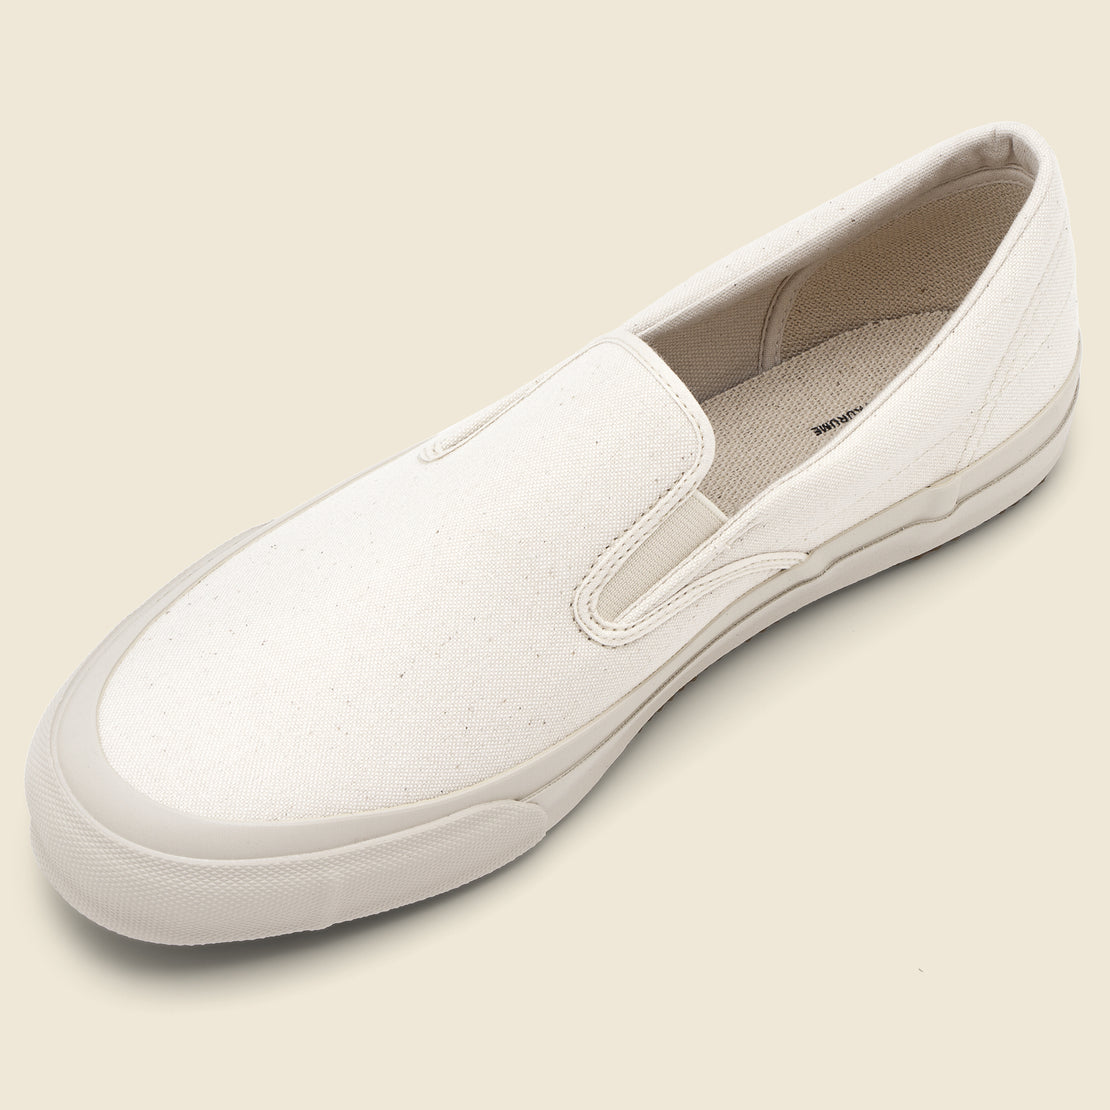 Moonstar Sidegoa Sneaker - Natural - Shoes Like Pottery - STAG Provisions - Shoes - Athletic